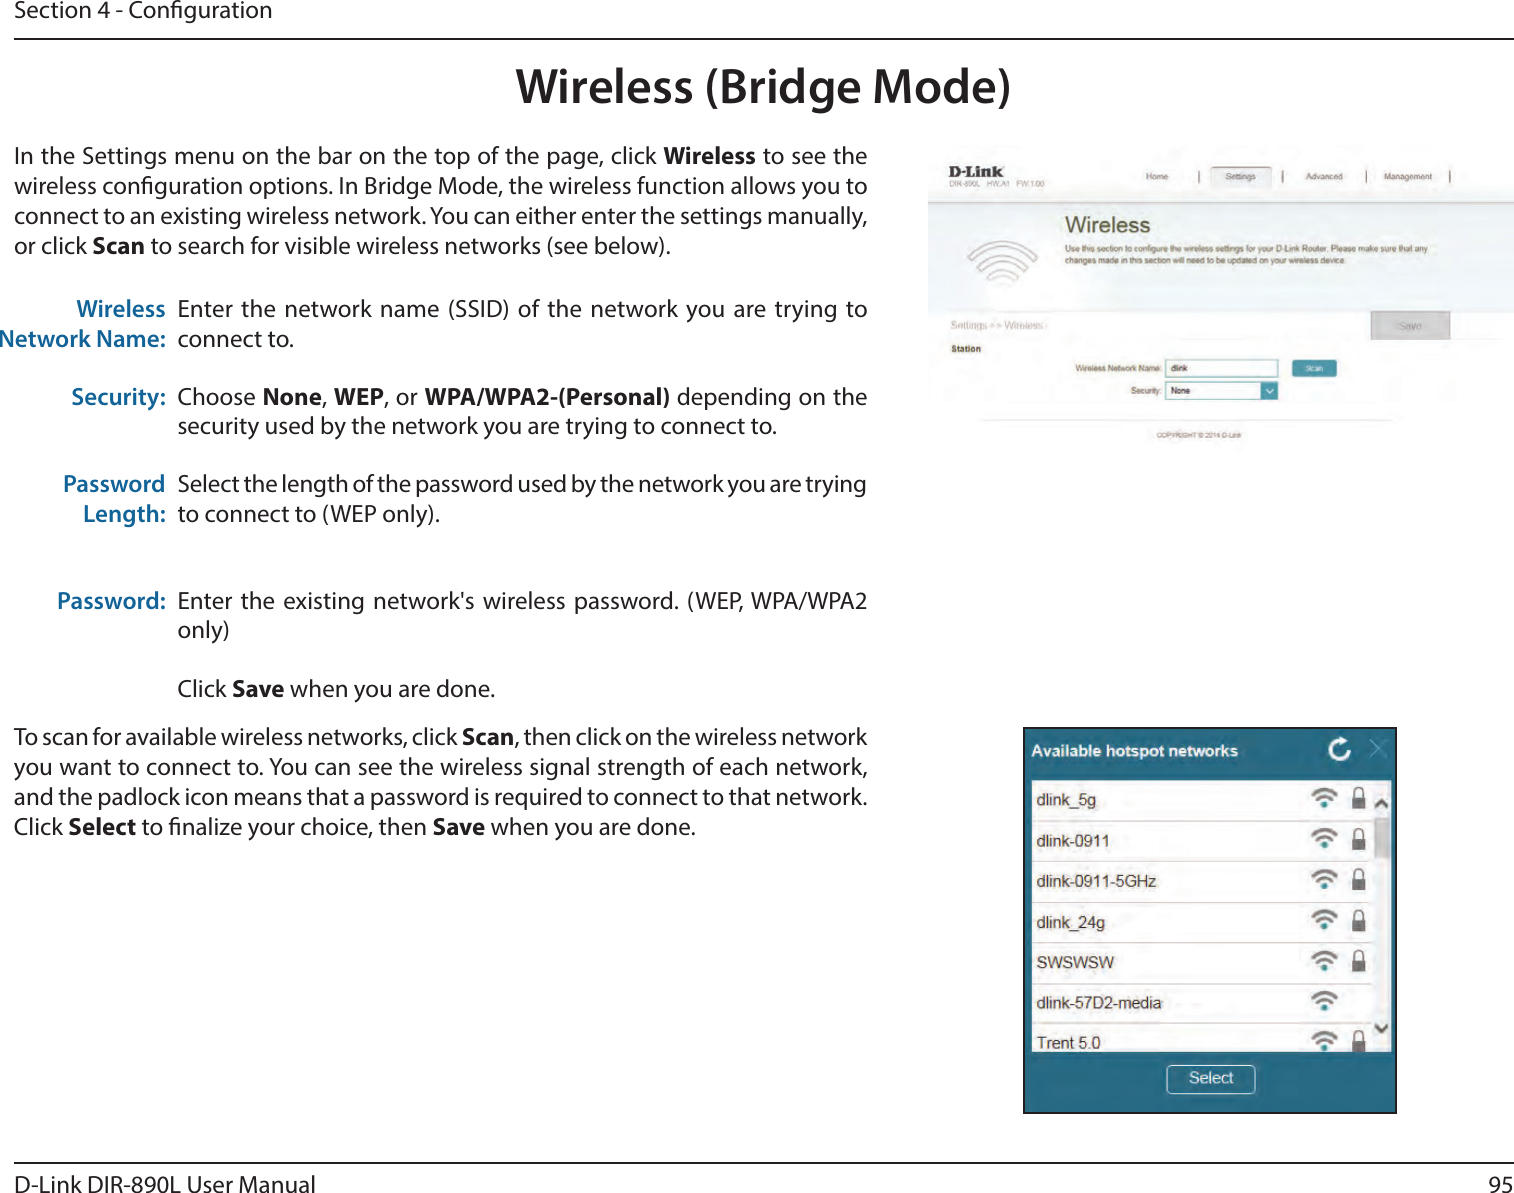 95D-Link DIR-890L User ManualSection 4 - CongurationWireless (Bridge Mode)Enter the network name (SSID) of the network you are trying to connect to. Choose None, WEP, or WPA/WPA2-(Personal) depending on the security used by the network you are trying to connect to.Select the length of the password used by the network you are trying to connect to (WEP only).Enter the existing network&apos;s wireless password. (WEP, WPA/WPA2 only)Click Save when you are done.Wireless Network Name:Security:Password Length:Password:In the Settings menu on the bar on the top of the page, click Wireless to see the wireless conguration options. In Bridge Mode, the wireless function allows you to connect to an existing wireless network. You can either enter the settings manually, or click Scan to search for visible wireless networks (see below).To scan for available wireless networks, click Scan, then click on the wireless network you want to connect to. You can see the wireless signal strength of each network, and the padlock icon means that a password is required to connect to that network. Click Select to nalize your choice, then Save when you are done.